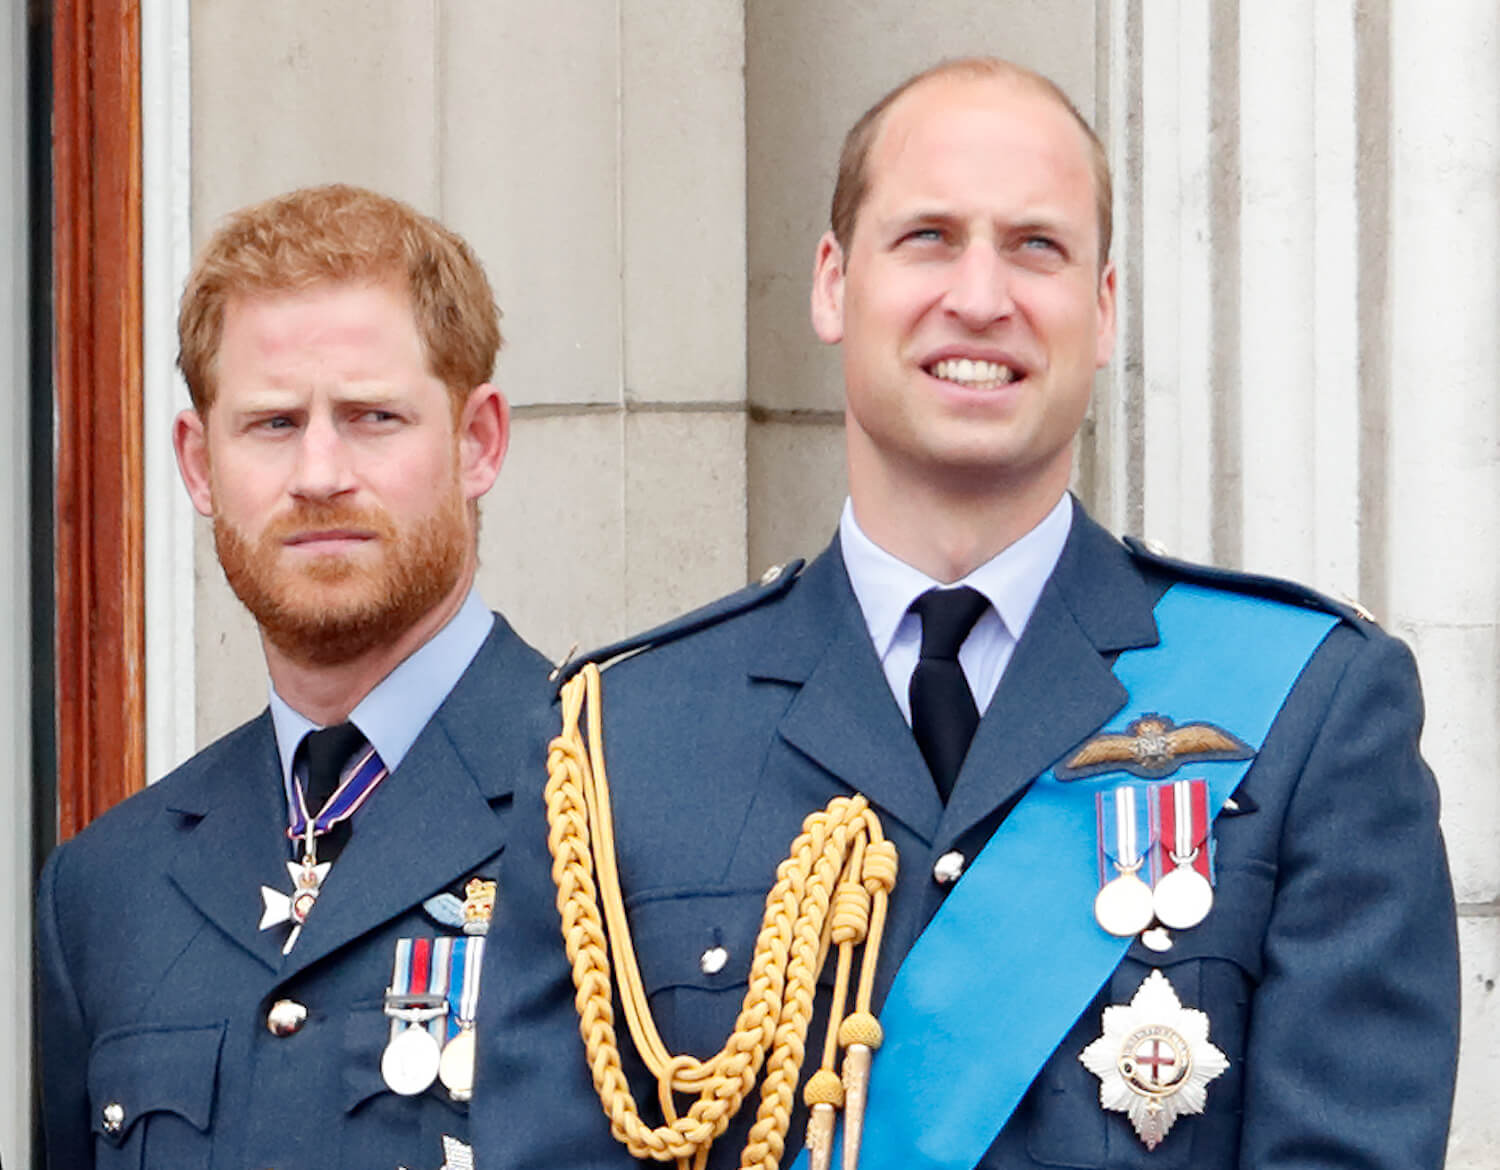 Prince Harry stands behind Prince William while standing on Buckingham Palace balcony